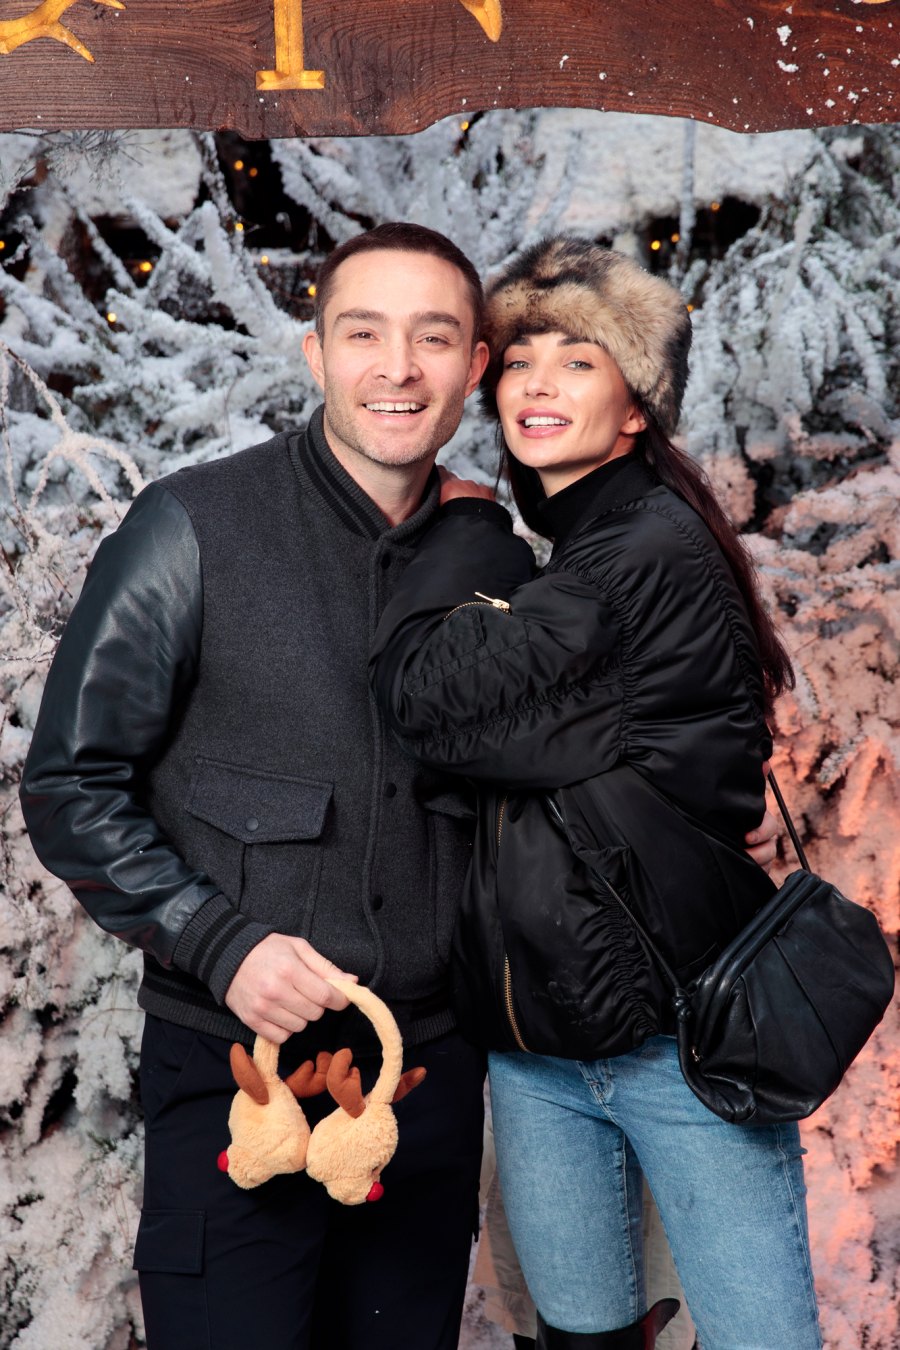 Ed Westwick Engaged to Amy Jackson After 2 Years of Dating